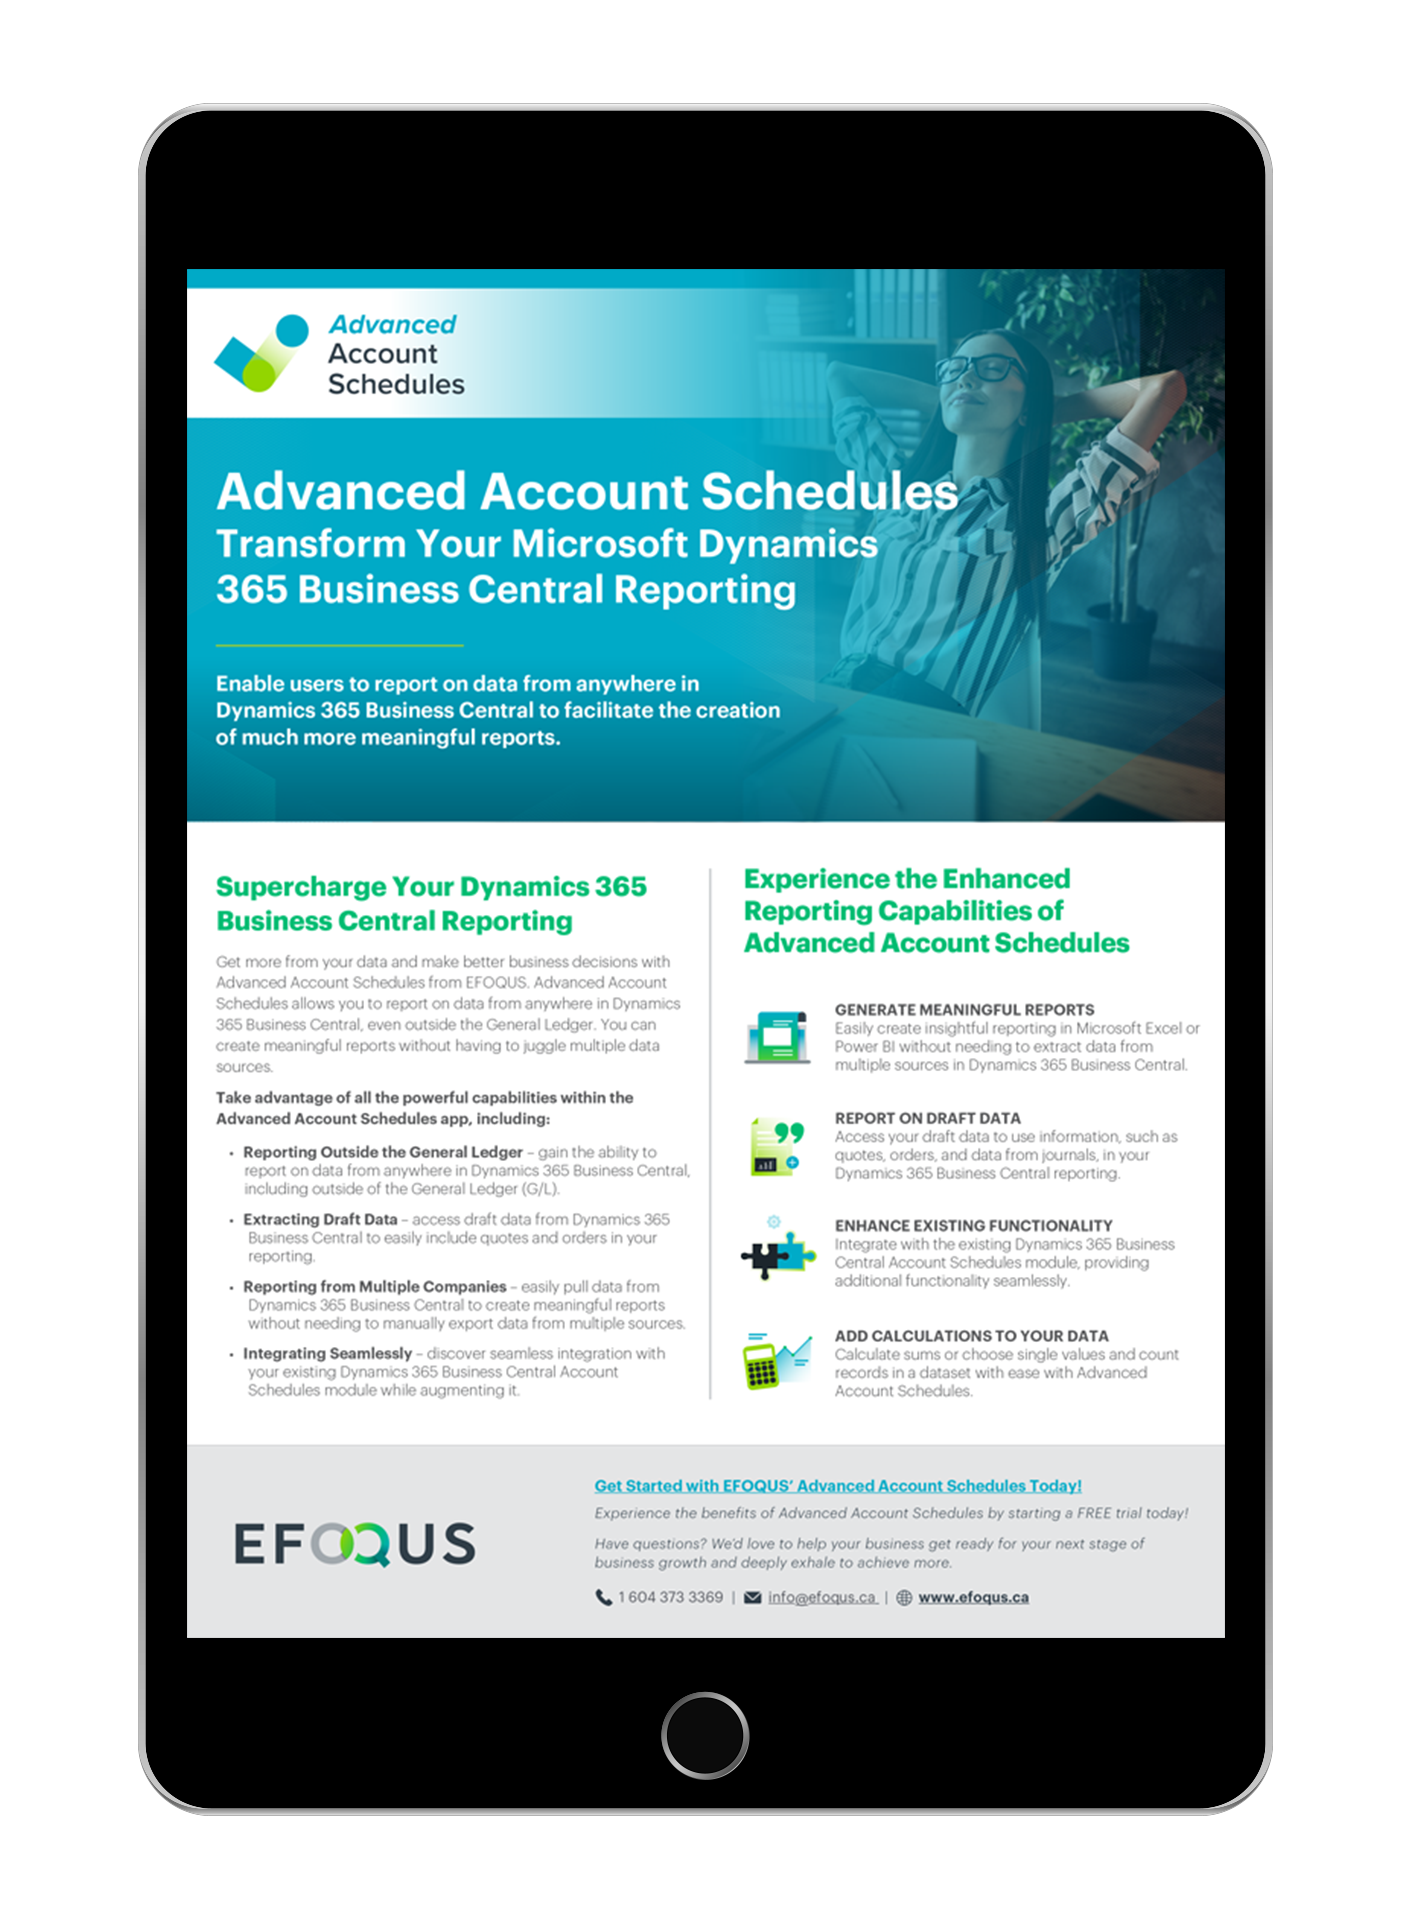 EFOQUS - advanced account schedules guide - microsoft dynamics 365 business central resource